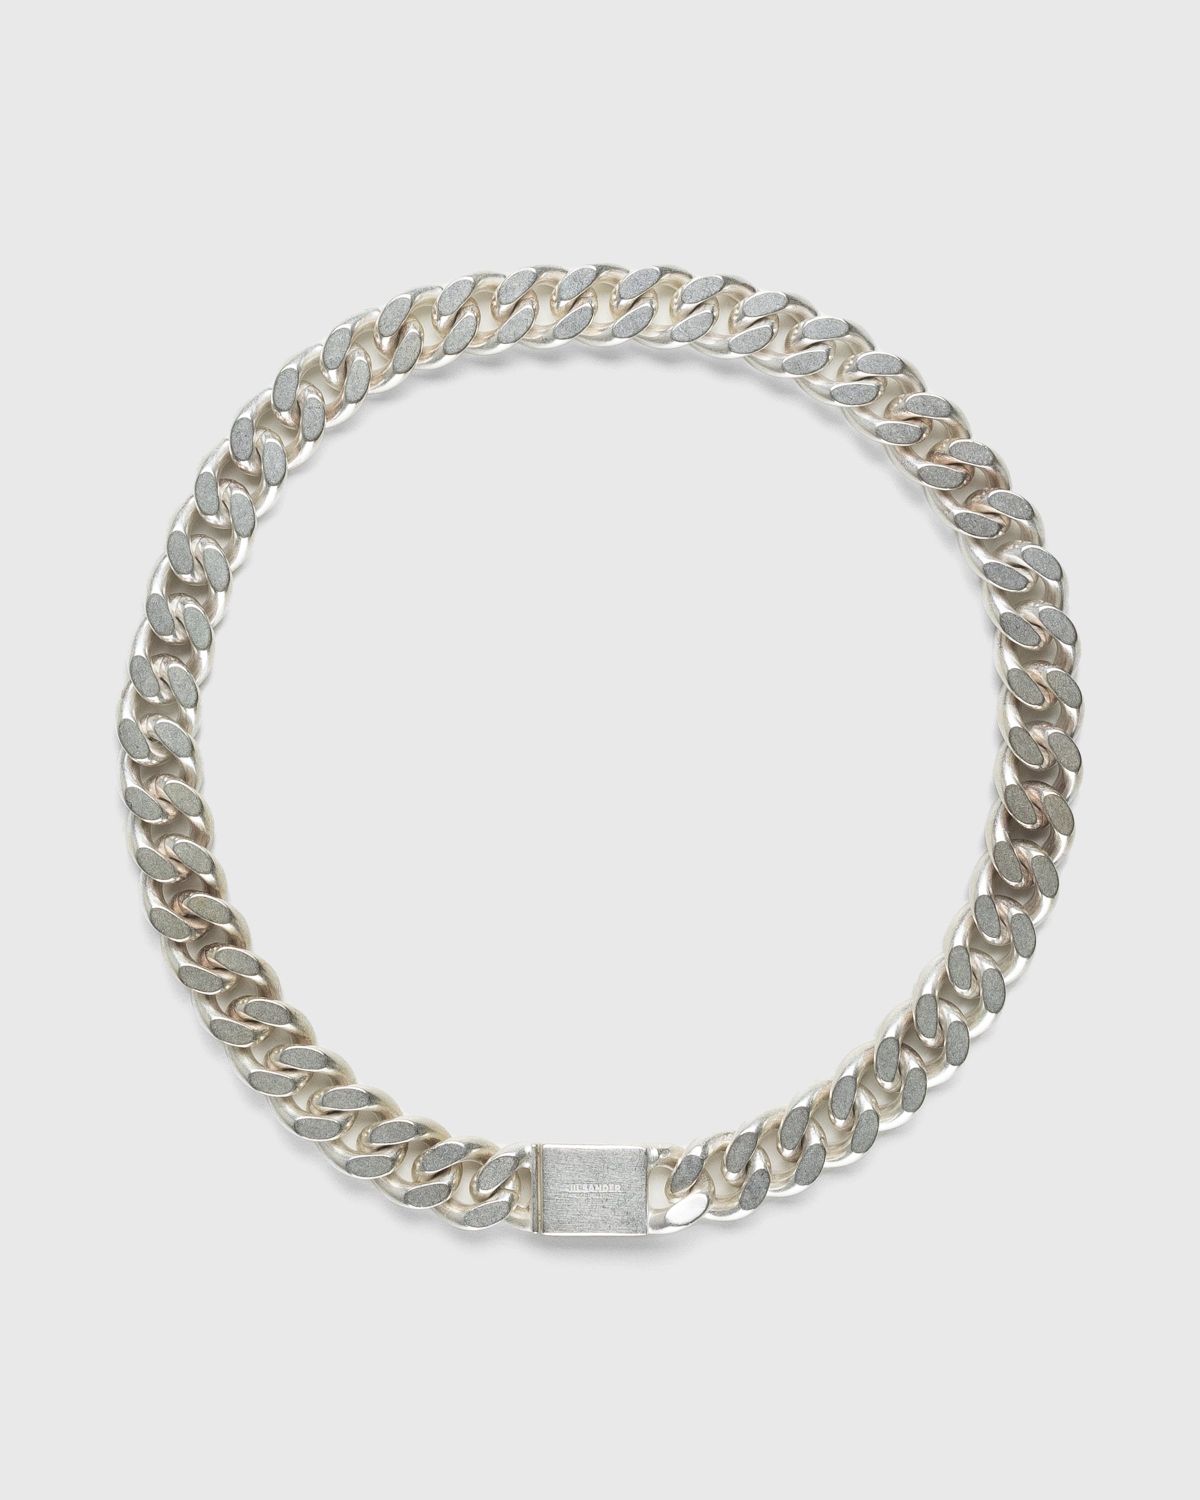 Jil Sander – Chain Link Necklace Silver - Jewelry - Silver - Image 1